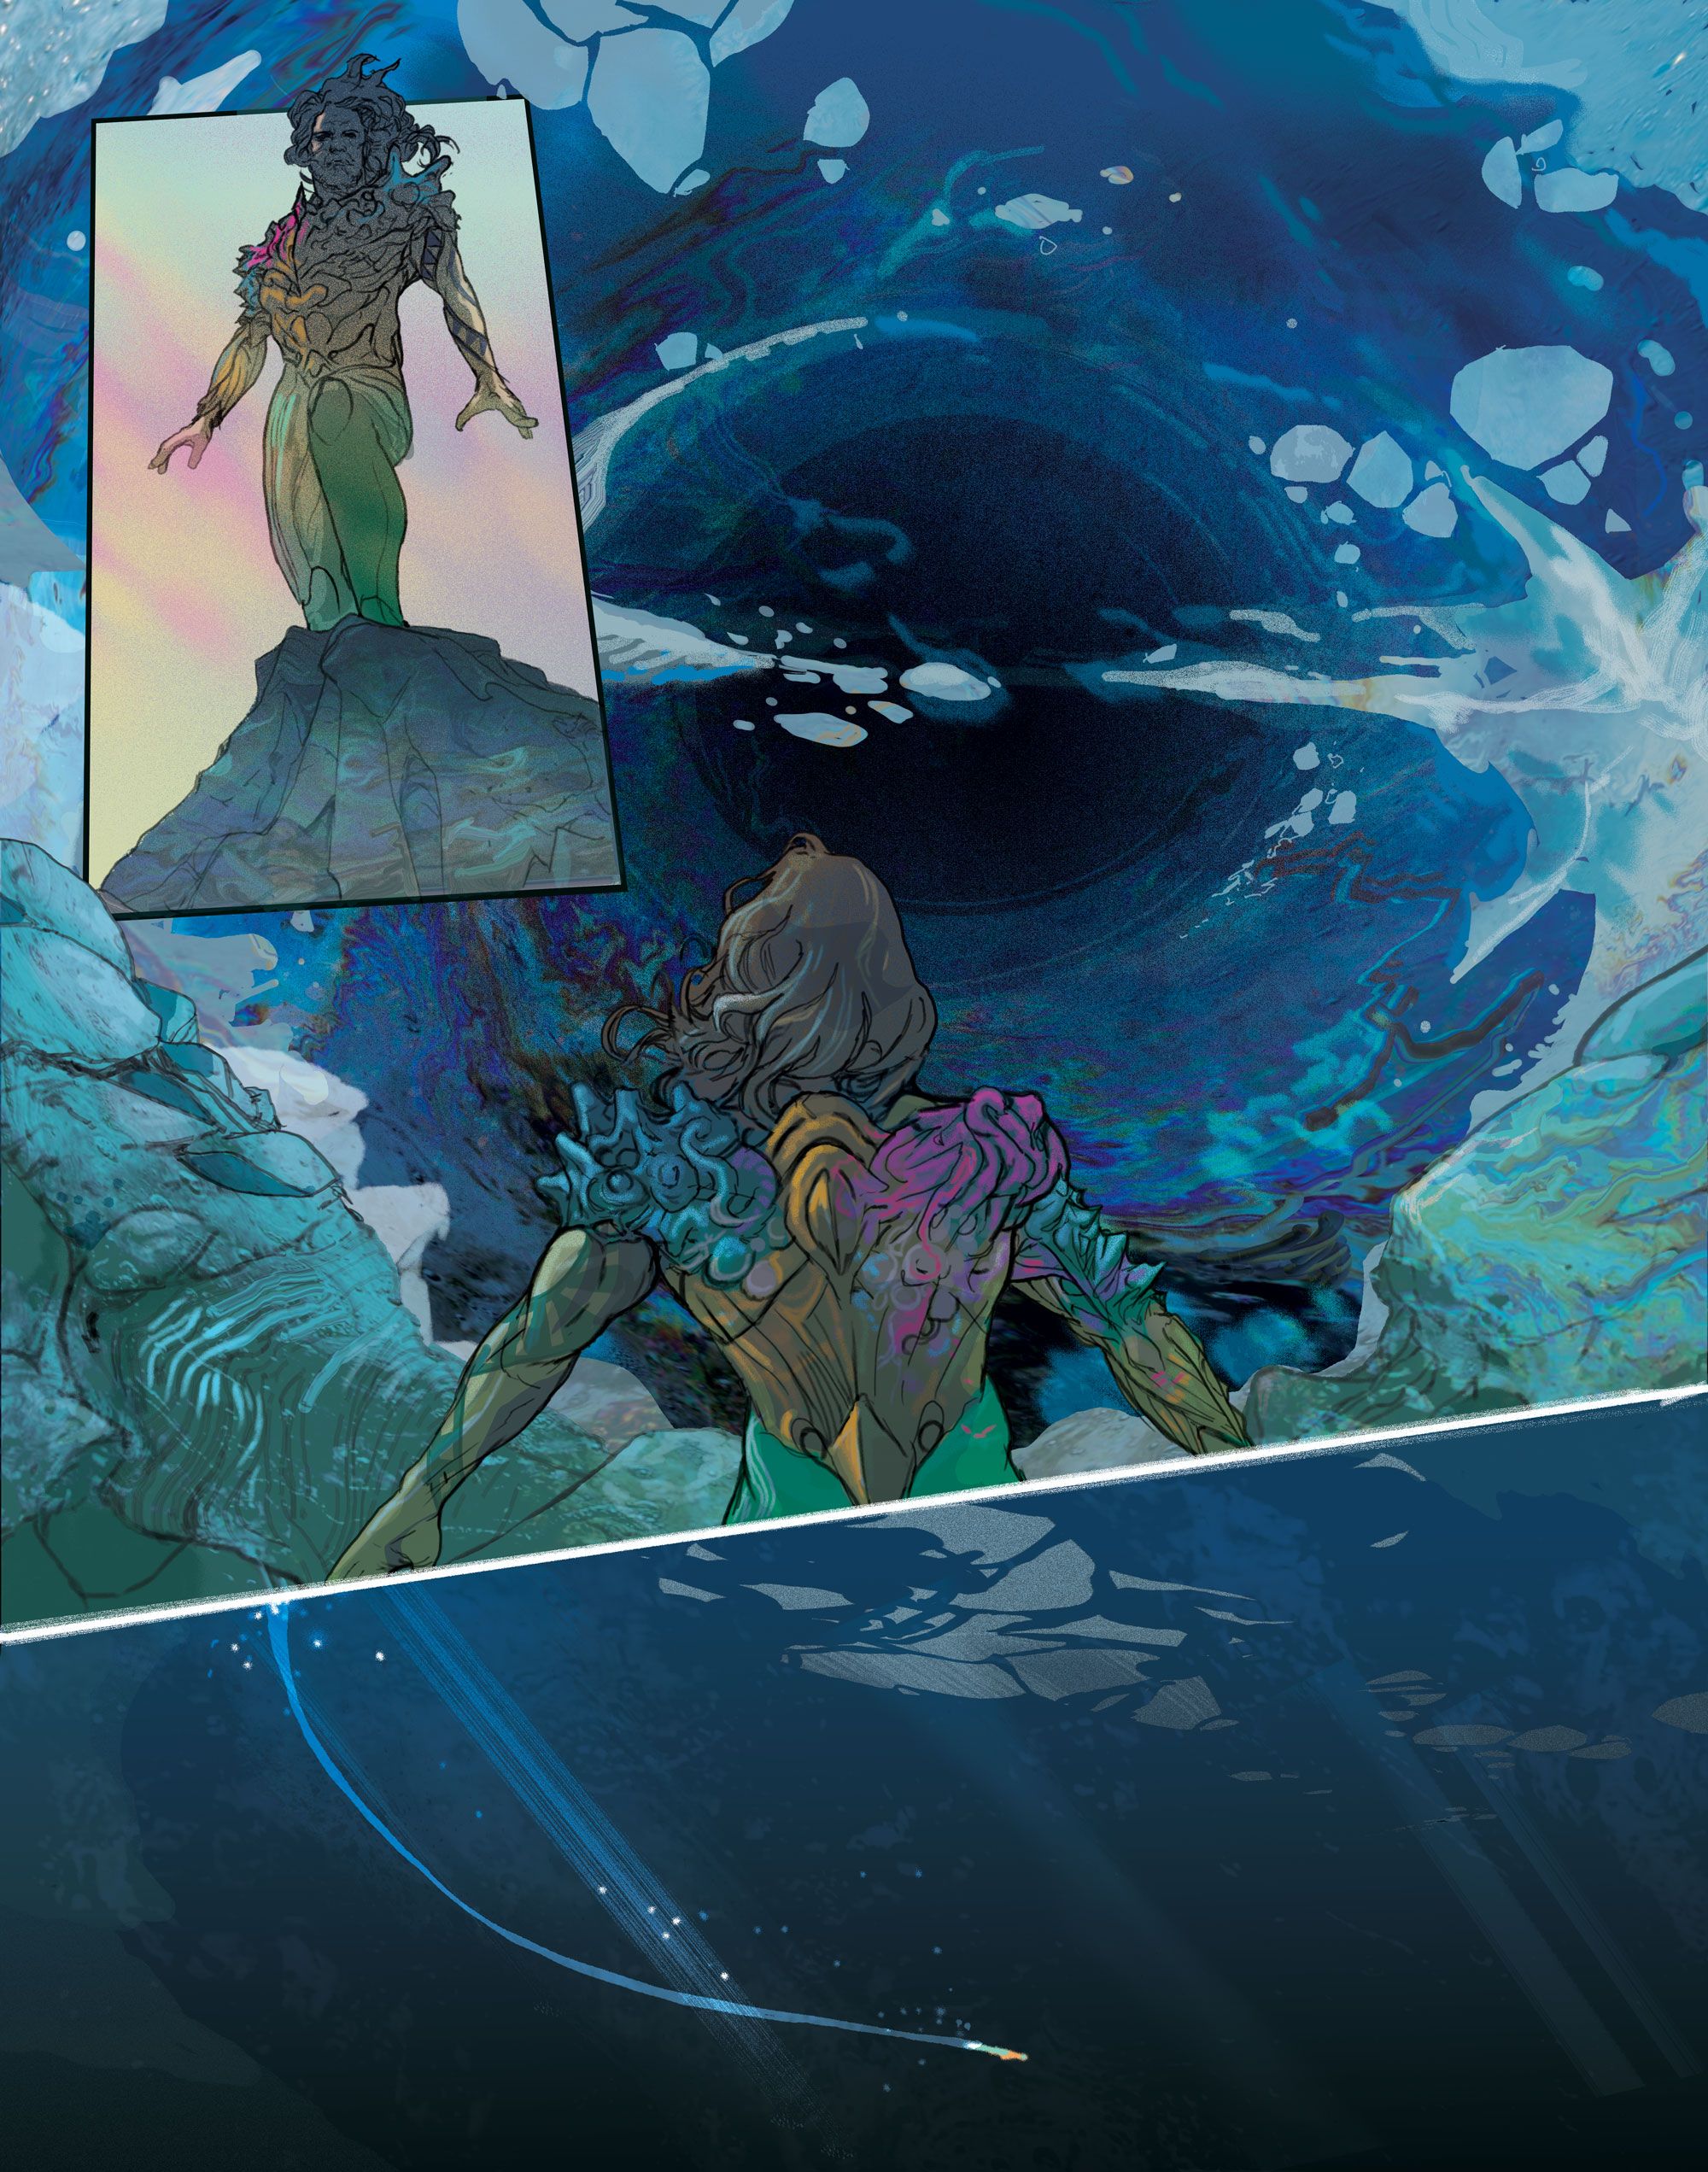 Art for Aquaman: Andromeda, a DC Black Label series by Ram V. and Christian Ward.